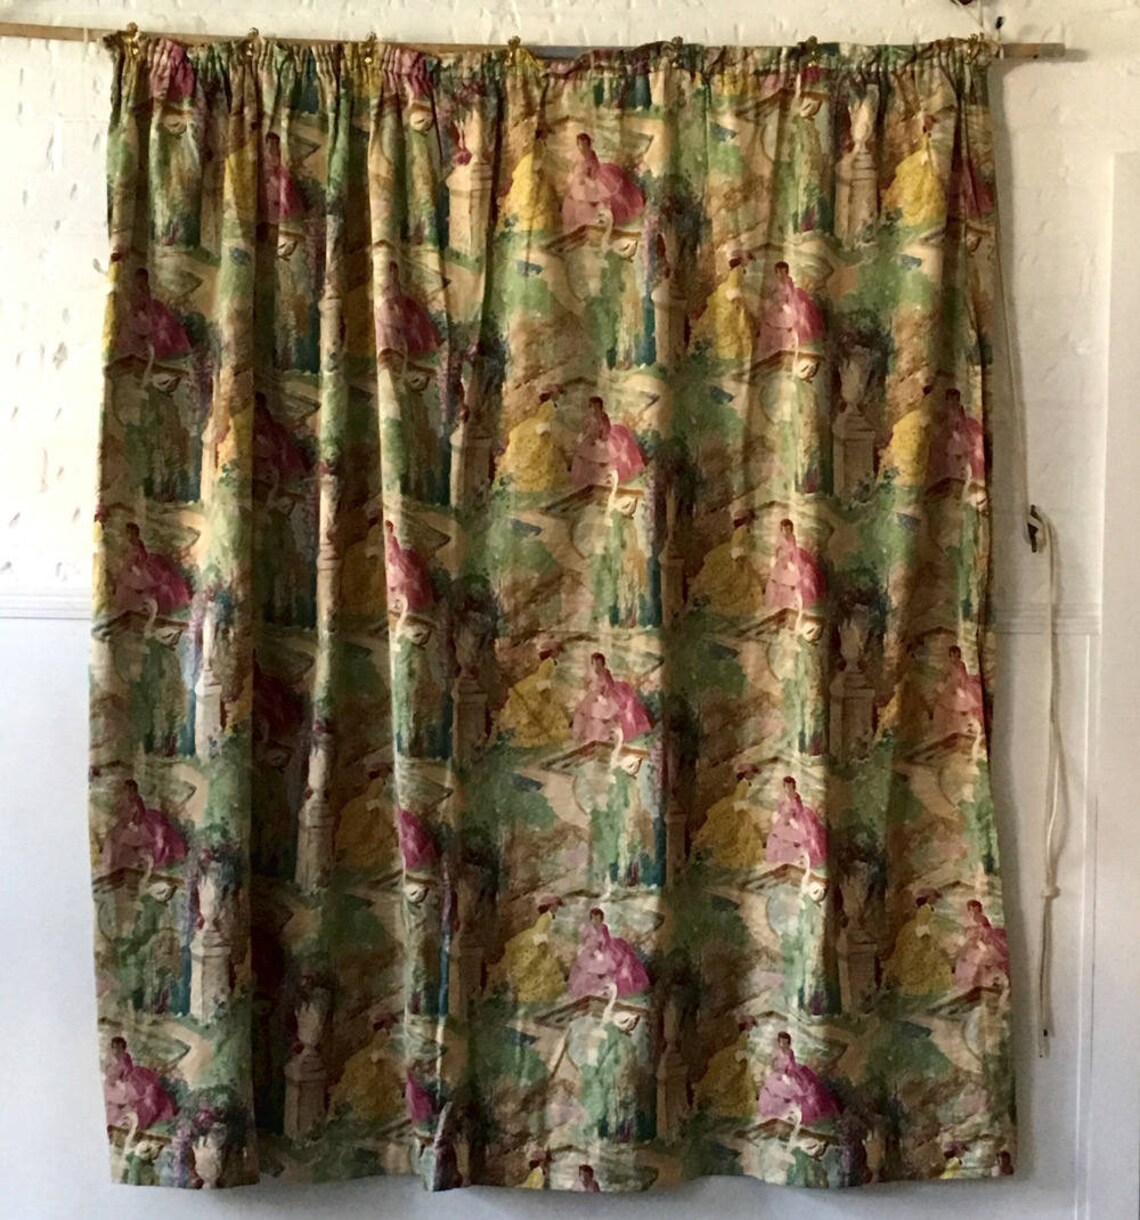 Vintage Curtains Sanderson Curtains Country Style | Etsy